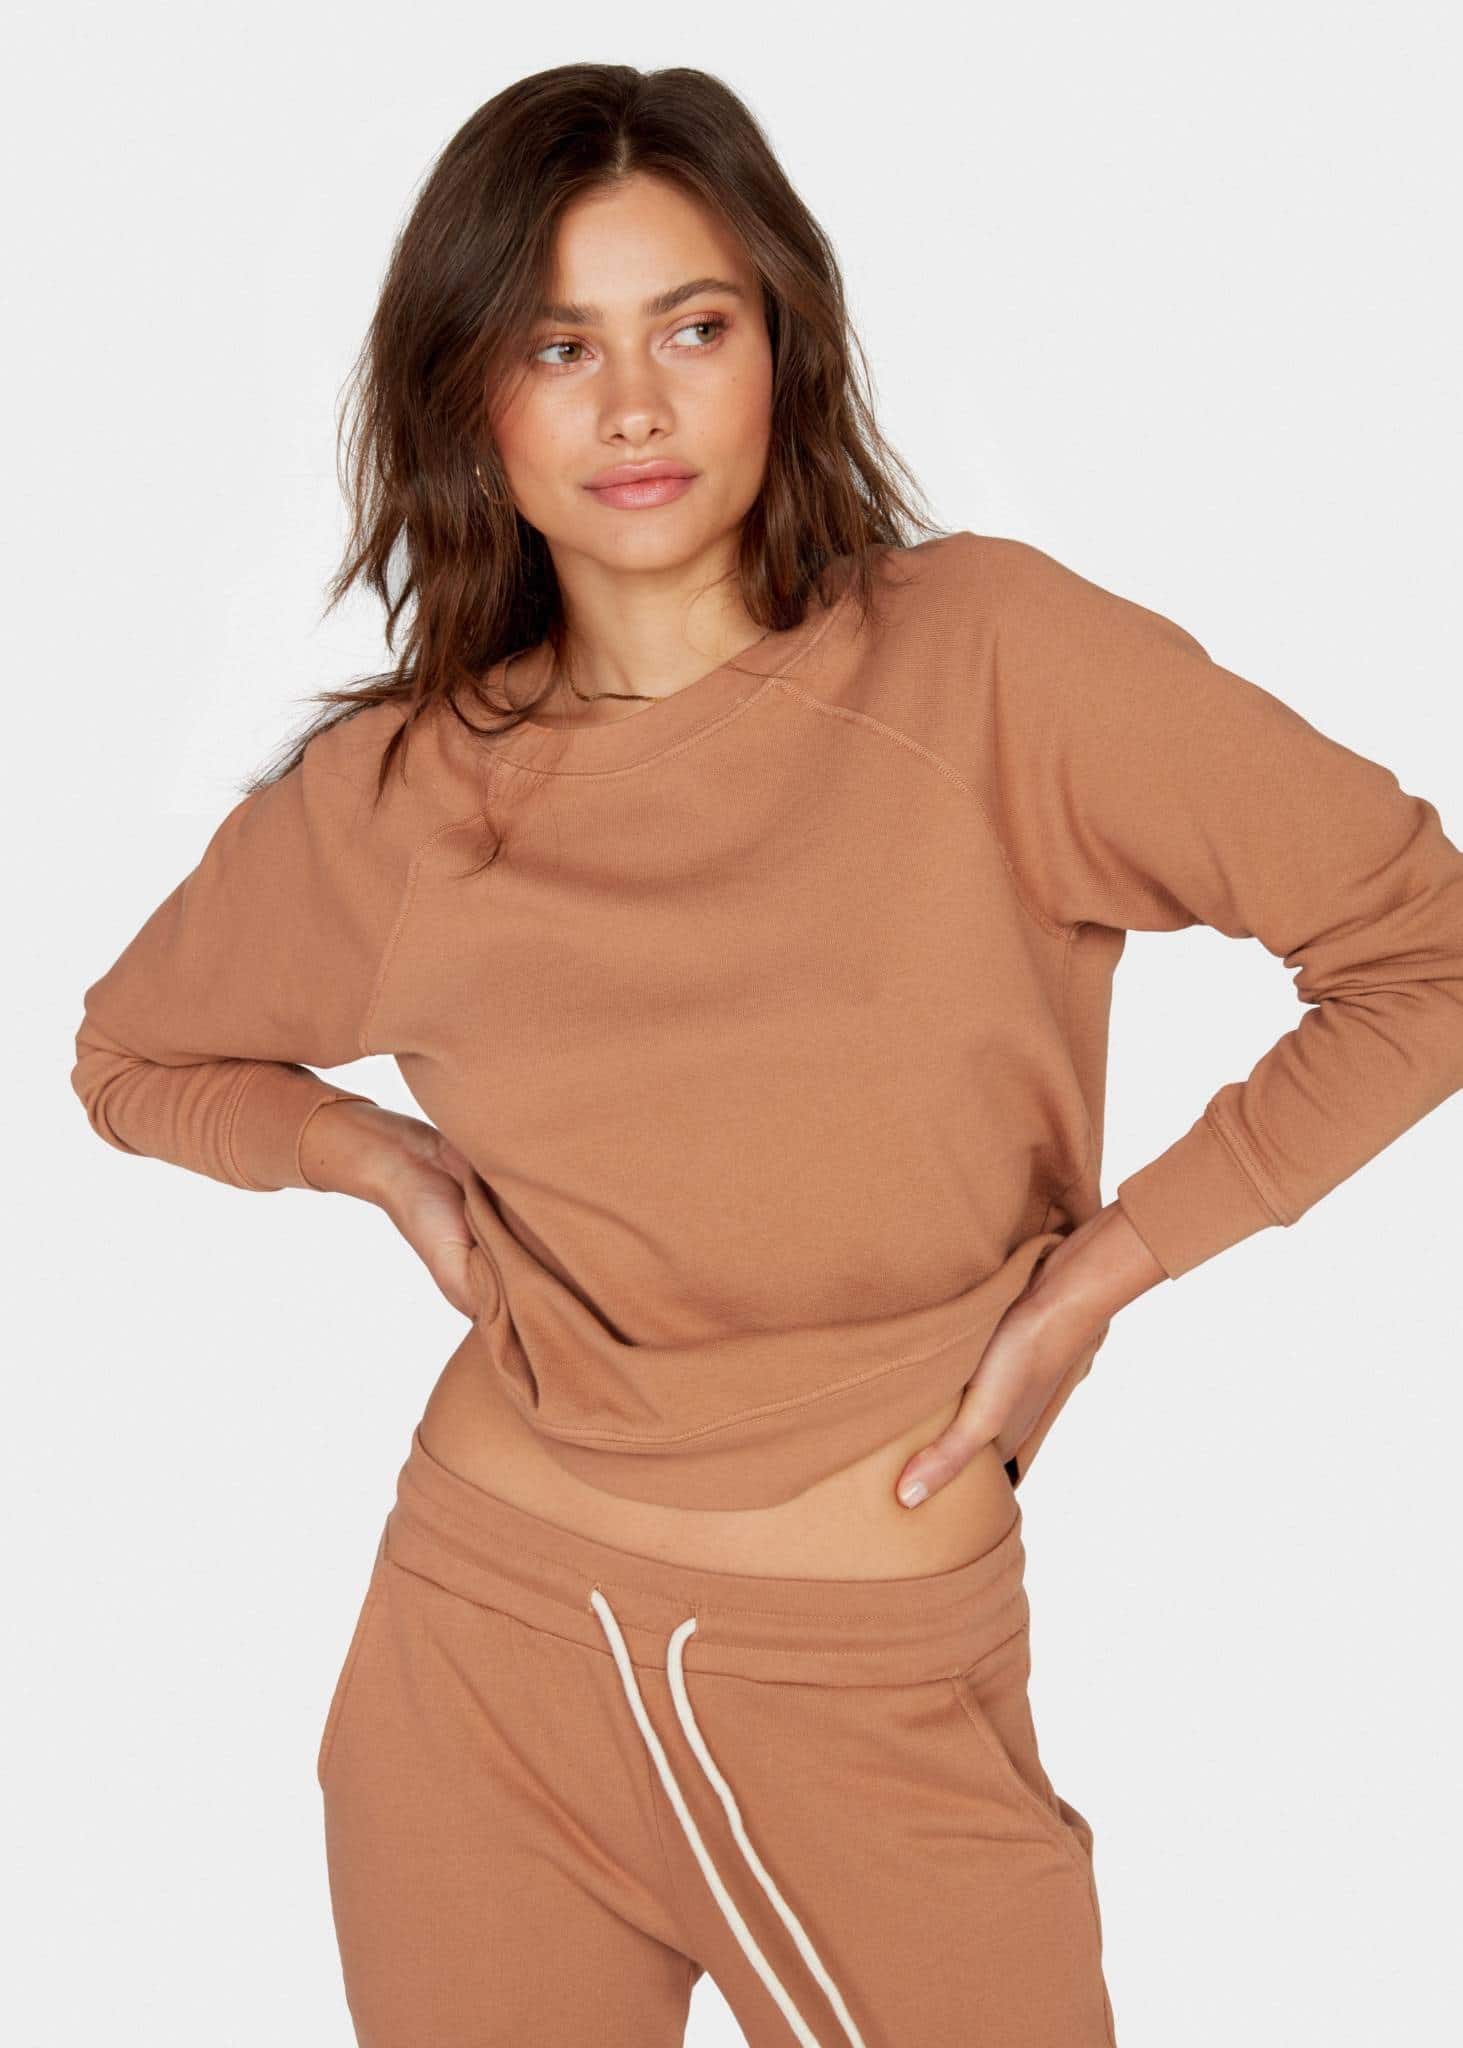 Ethical tracksuits lounge sets